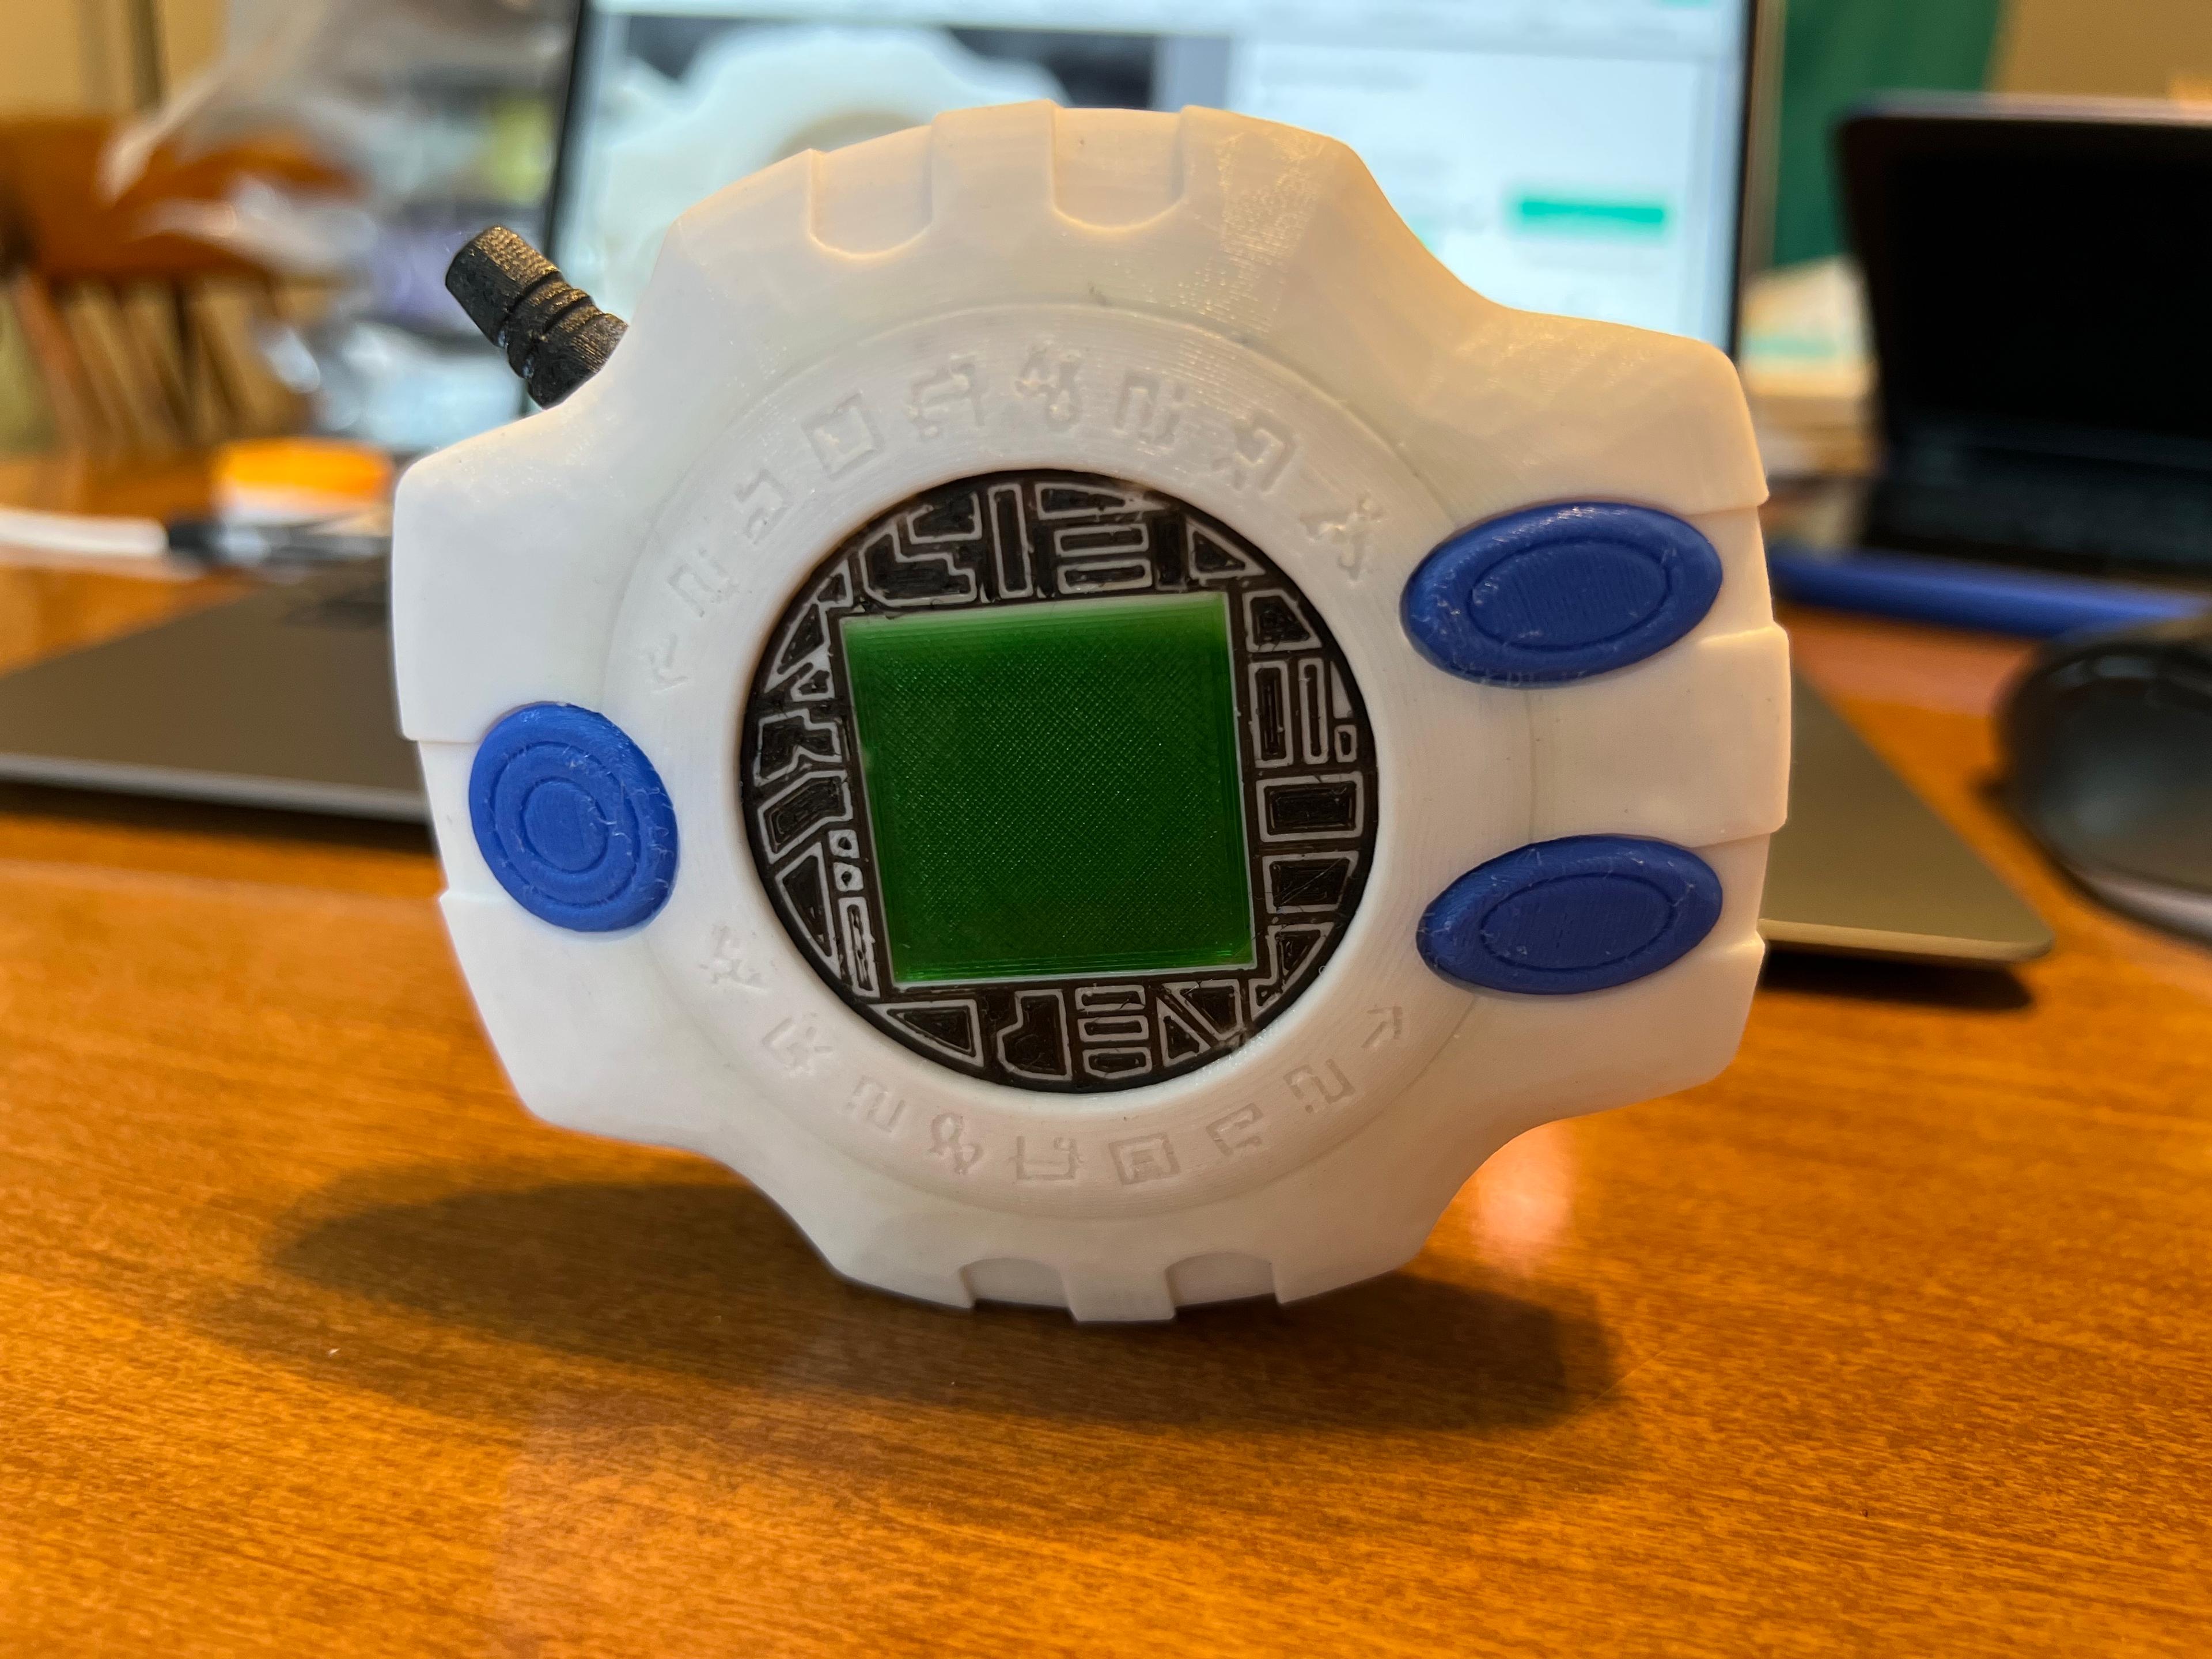 Digimon Digivice #frankly_built.stl - Minor remix to just have a flat green screen. Printed in PLA on Prusa i3 MK3S + MMU2S with .1mm layers - 3d model